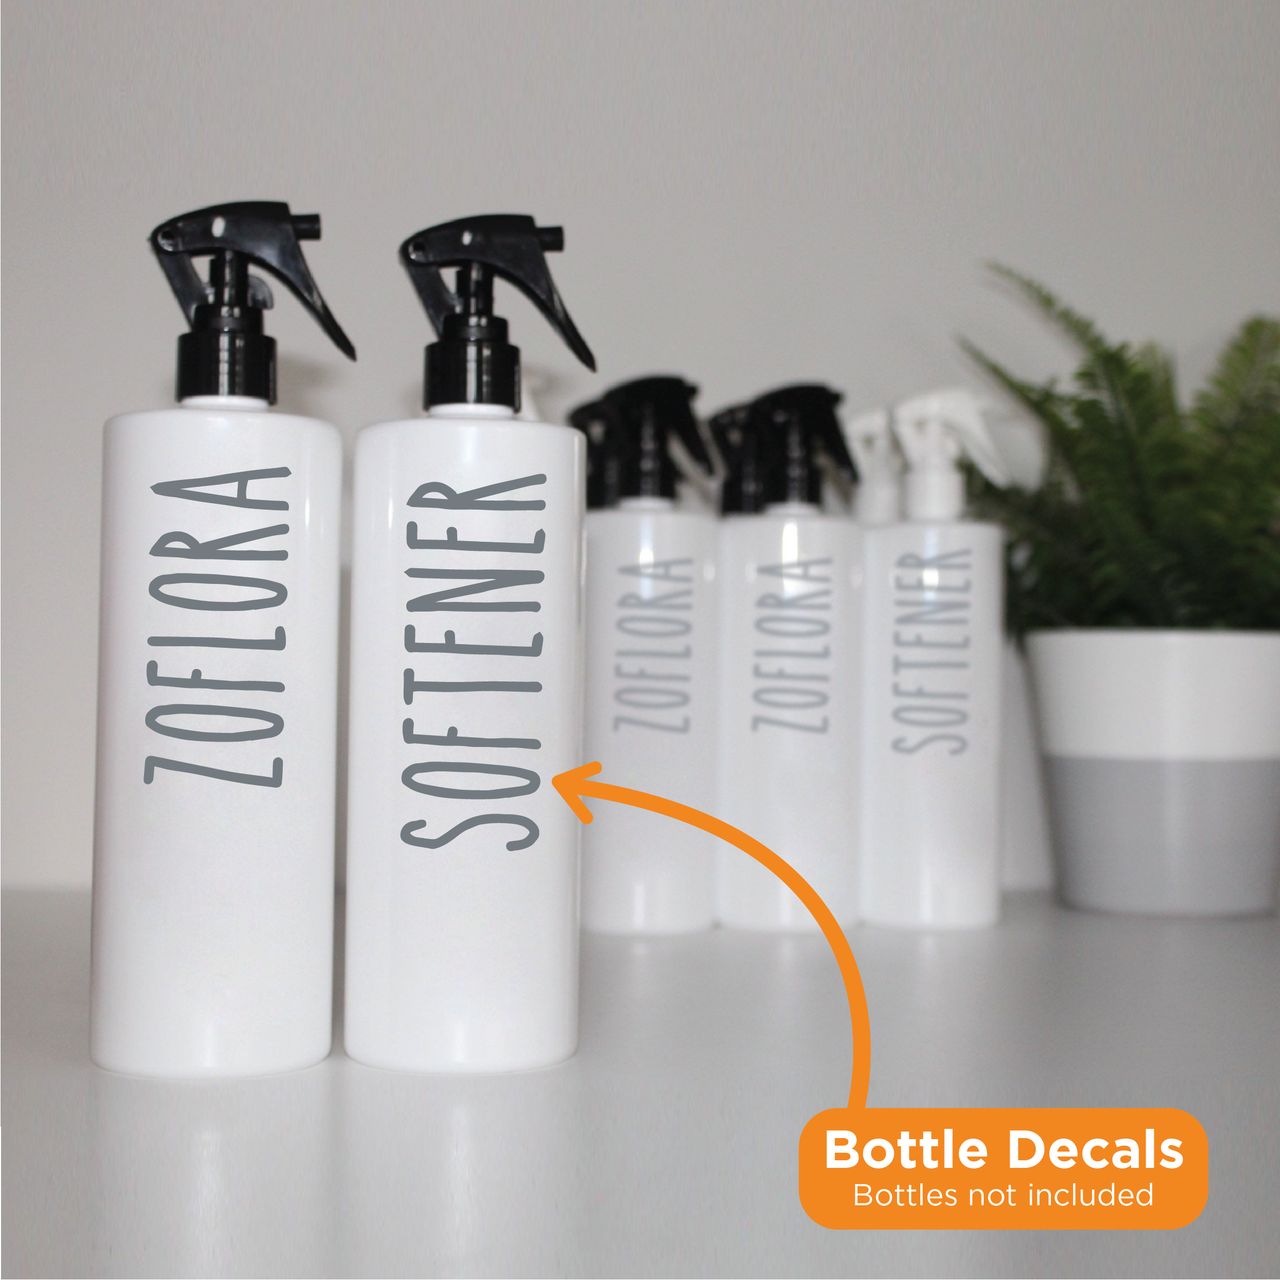 ZOFLORA AND SOFTENER - Mrs Hinch inspired spray bottle decals (Type 5)